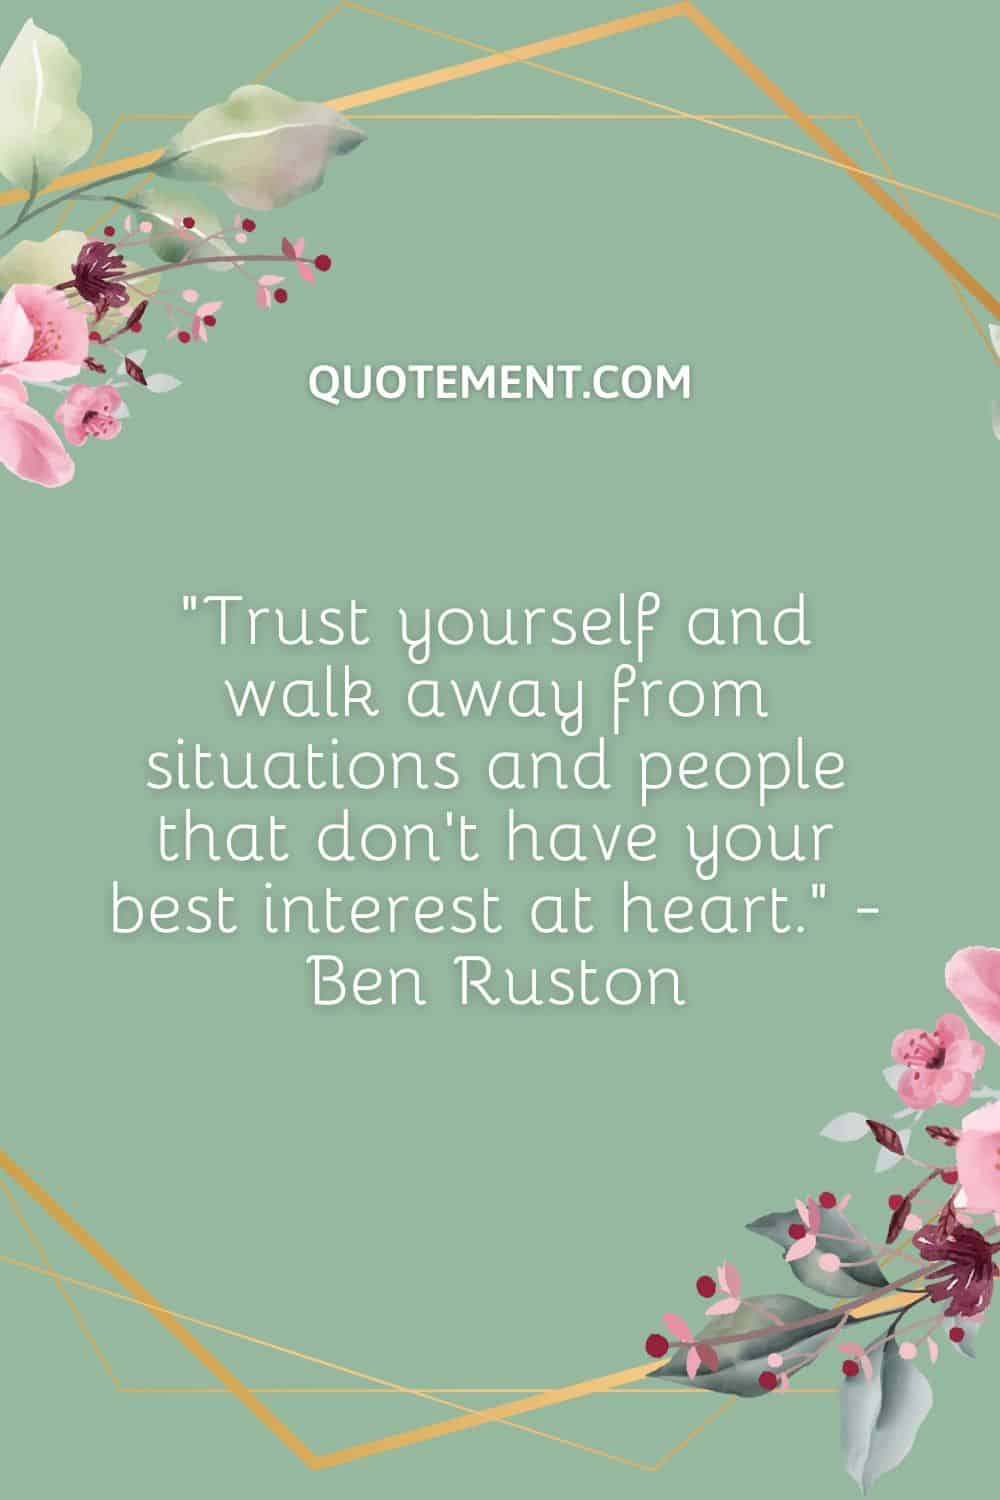 Trust yourself and walk away from situations and people that don’t have your best interest at heart